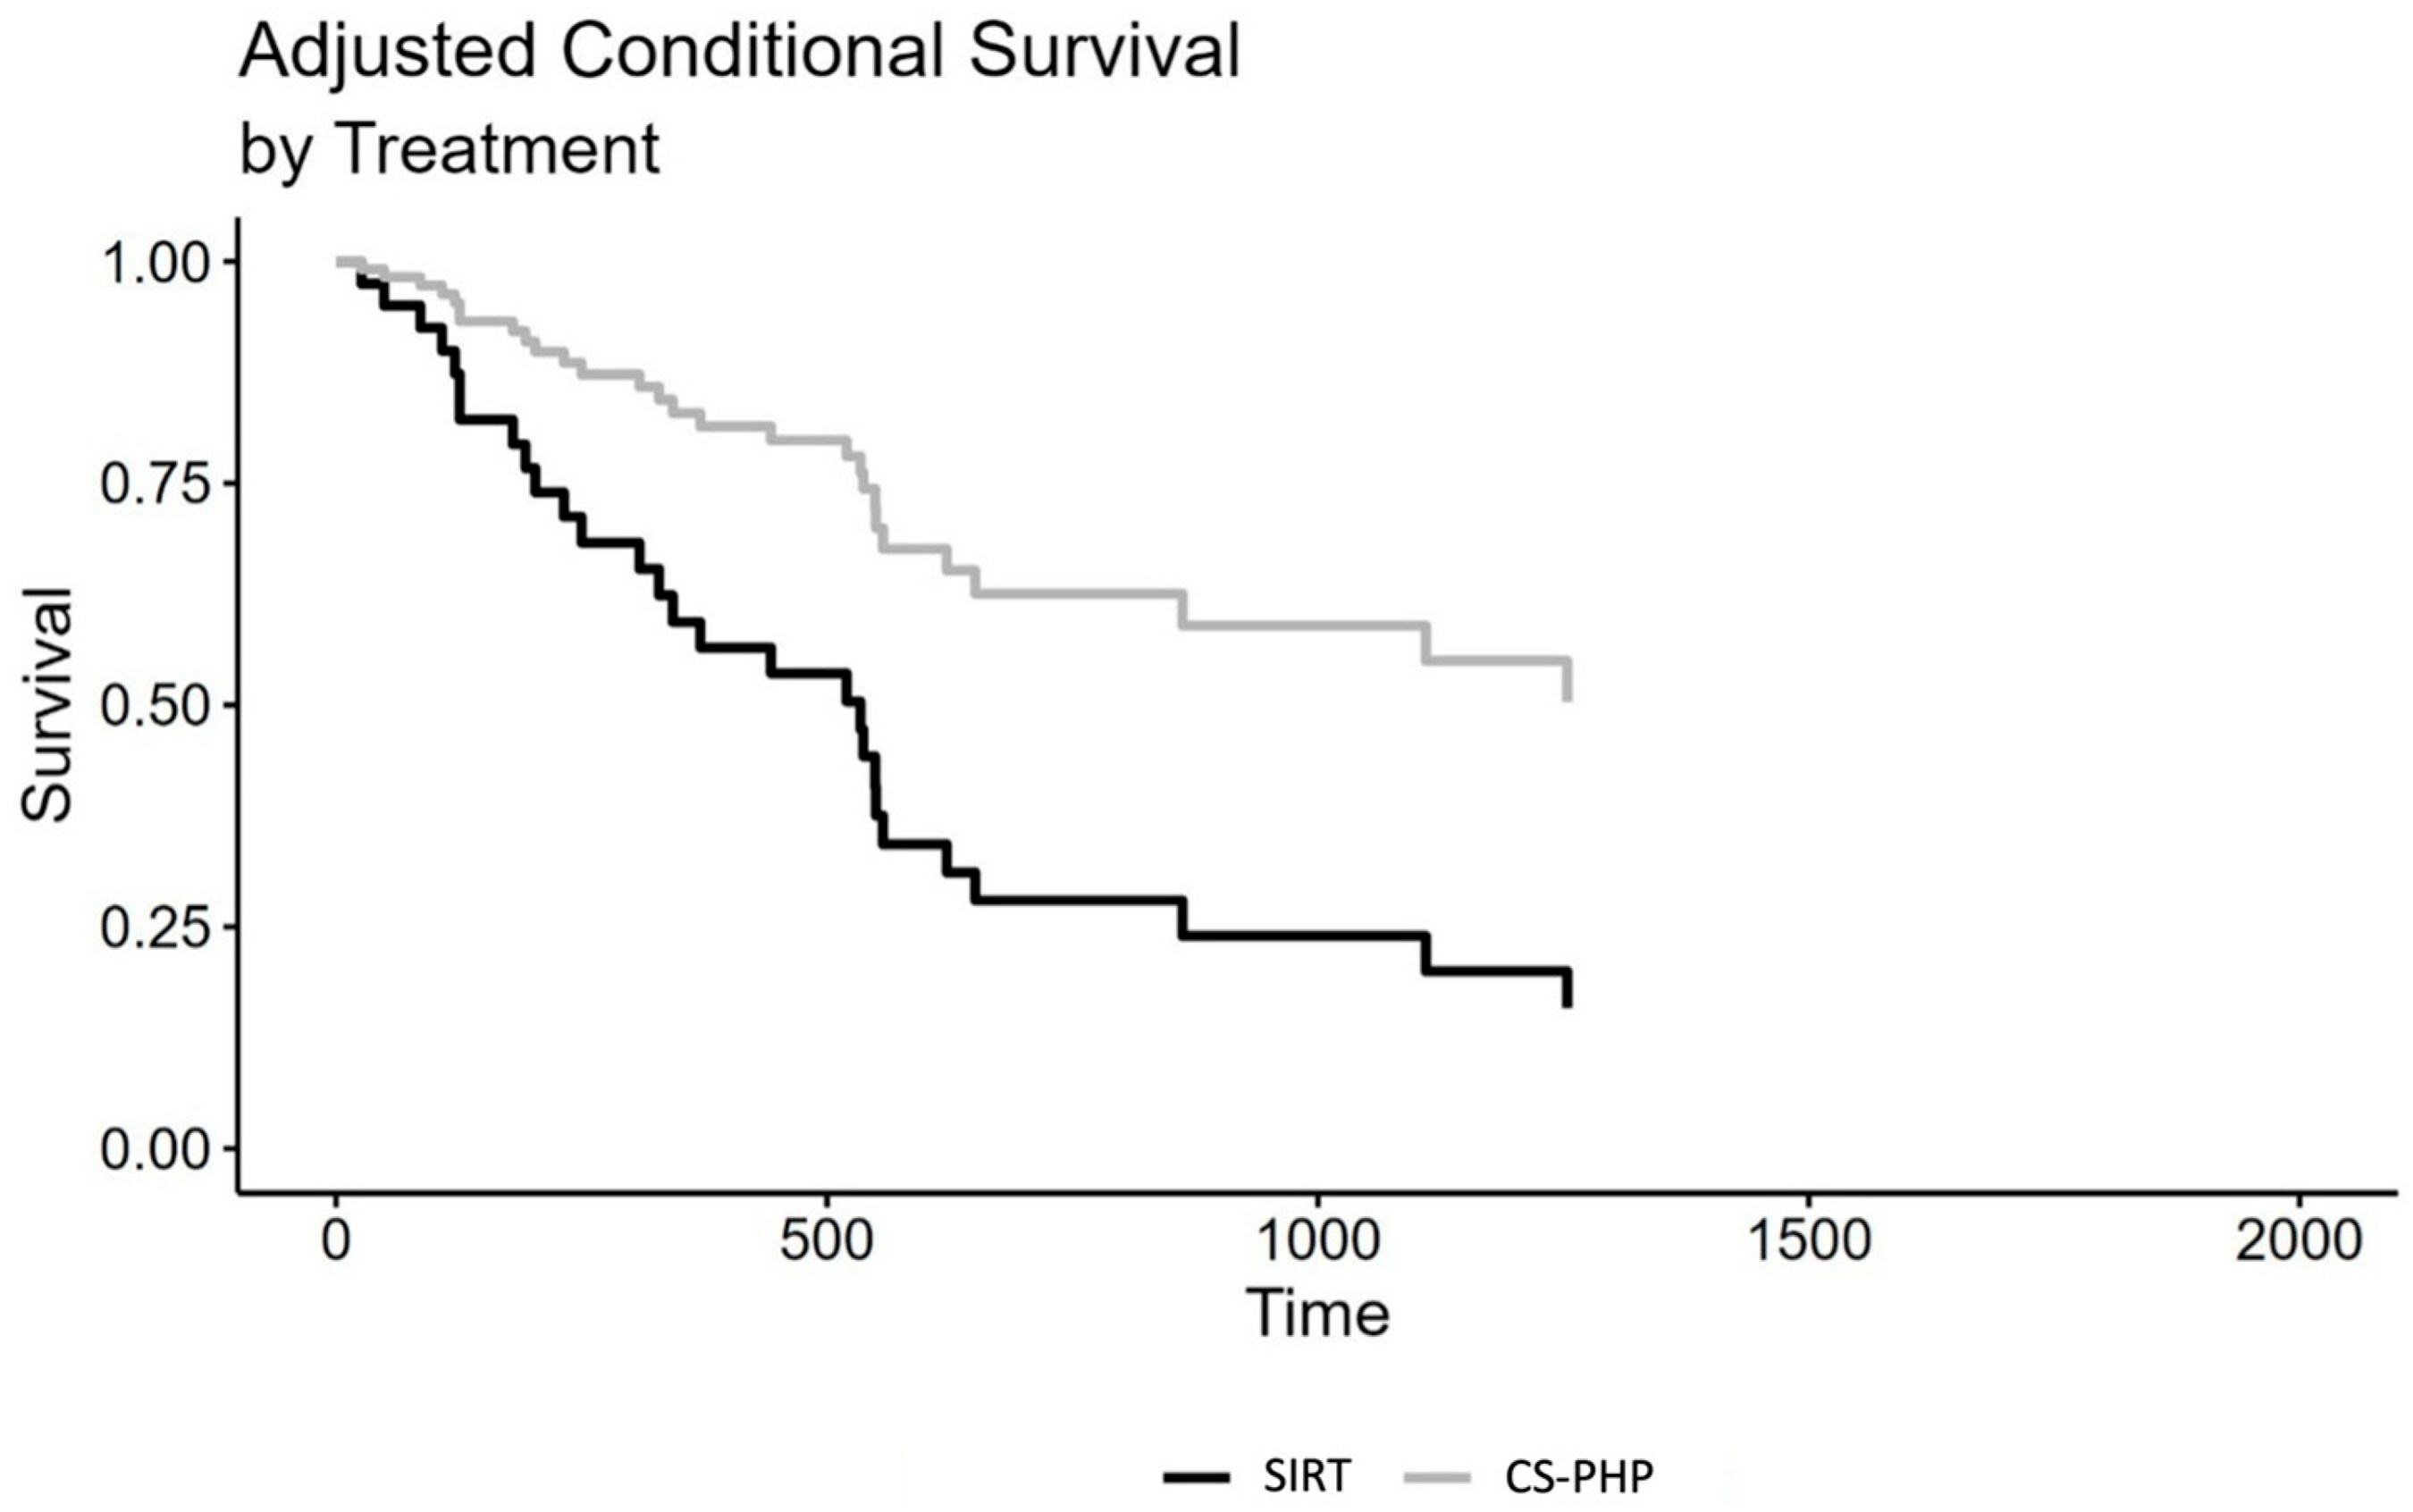 Adjusted Conditional Survival by Treatment.